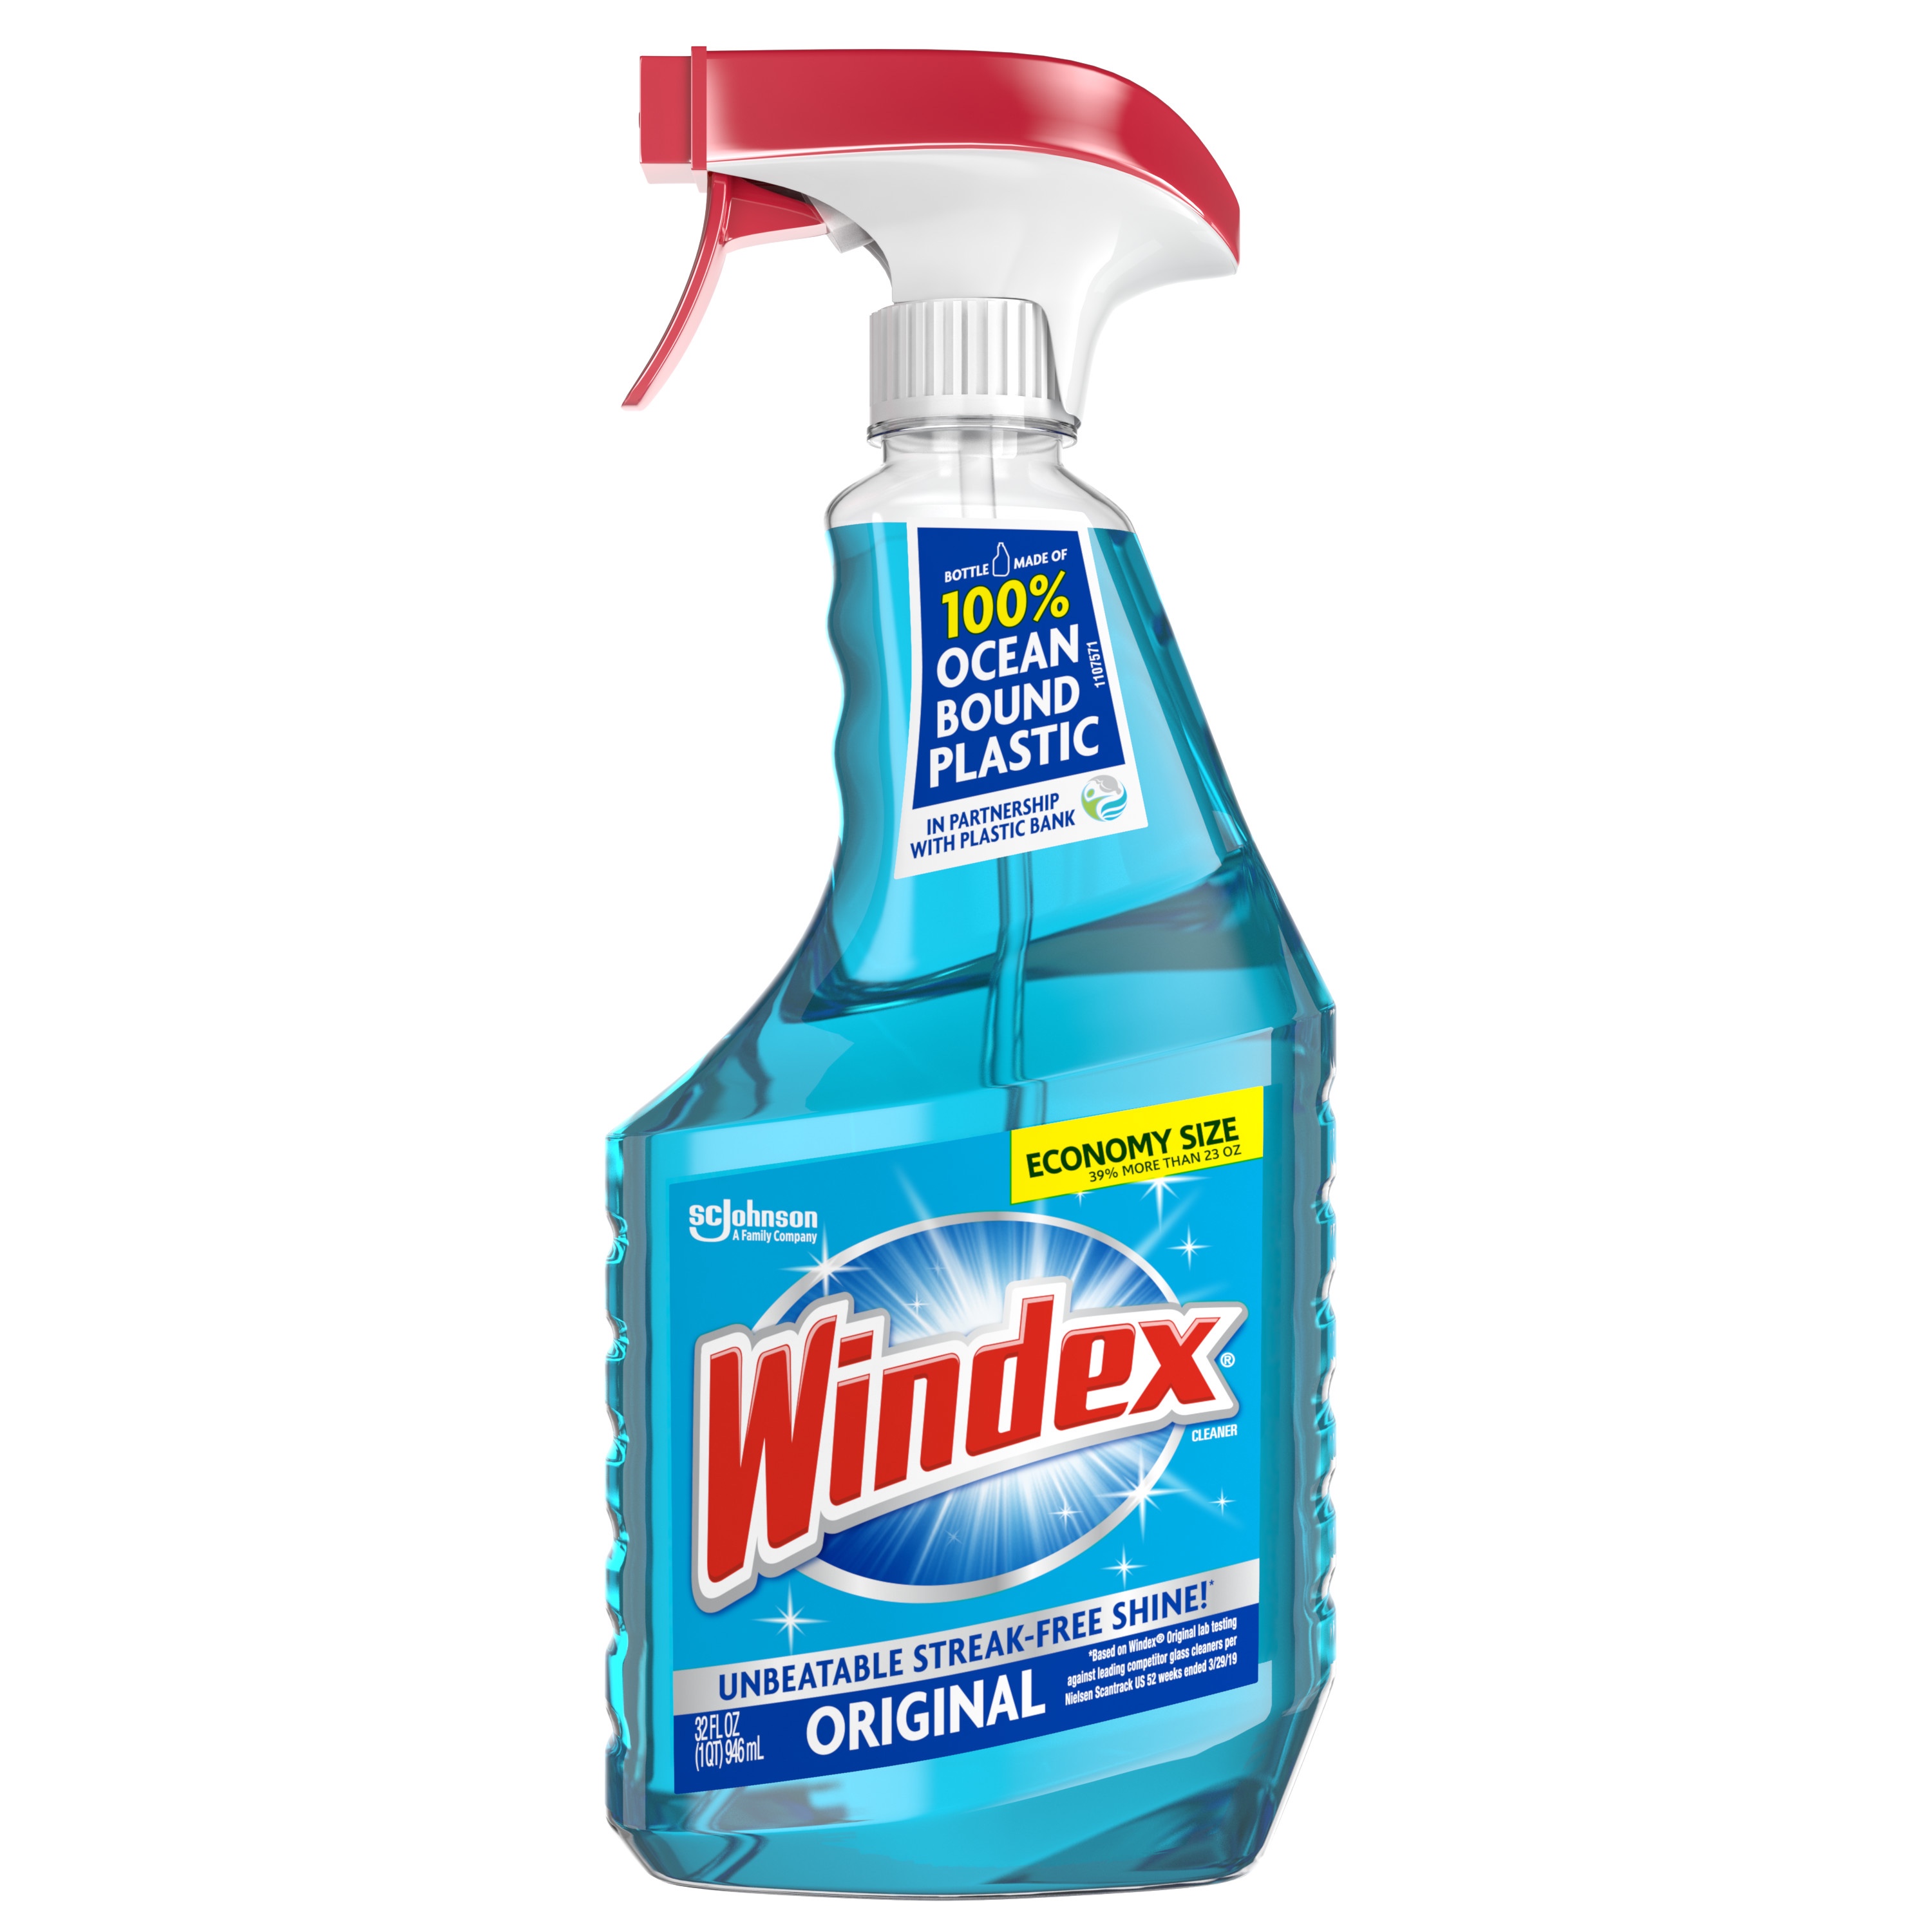 Can you use Windex to clean Costas?